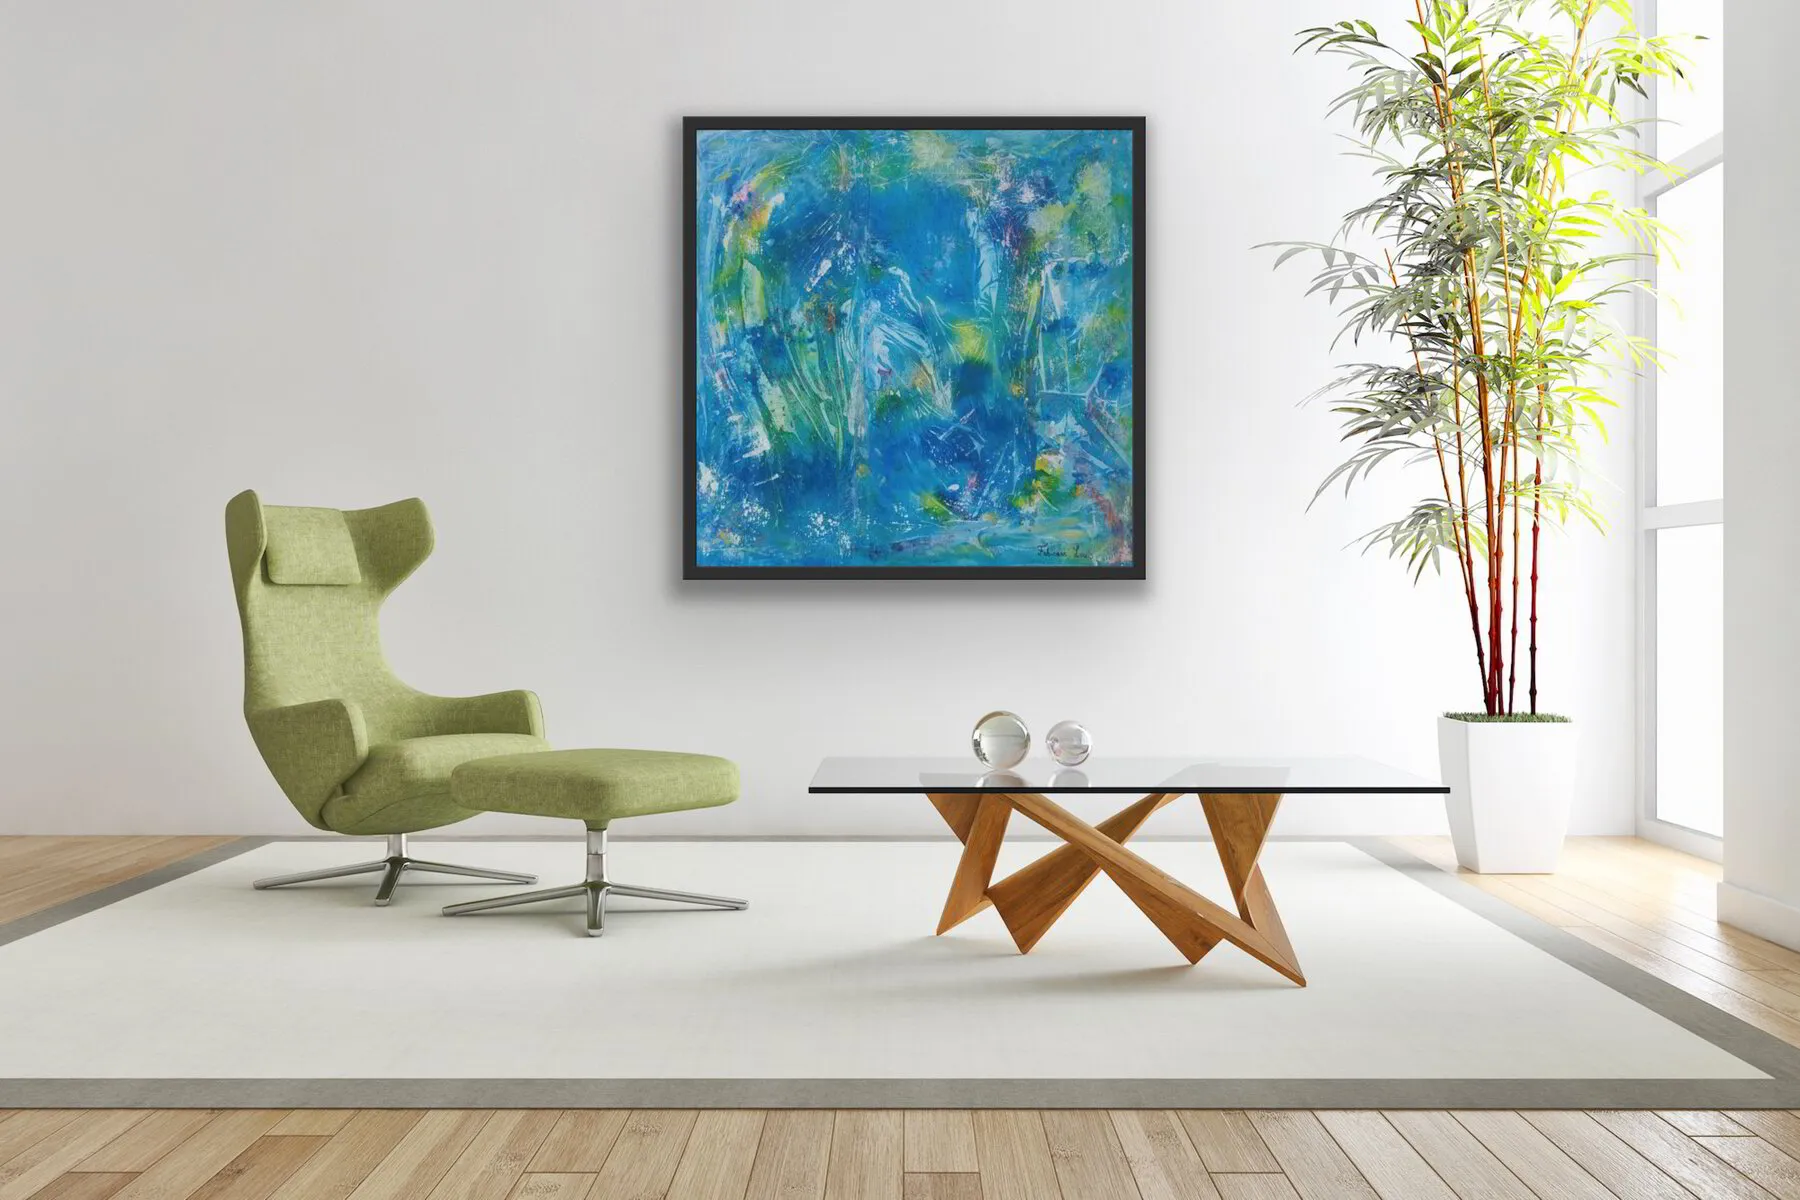 Interior Design with Vibrant Abstract Artwork on the wall by Artist, Fabienne Louis.